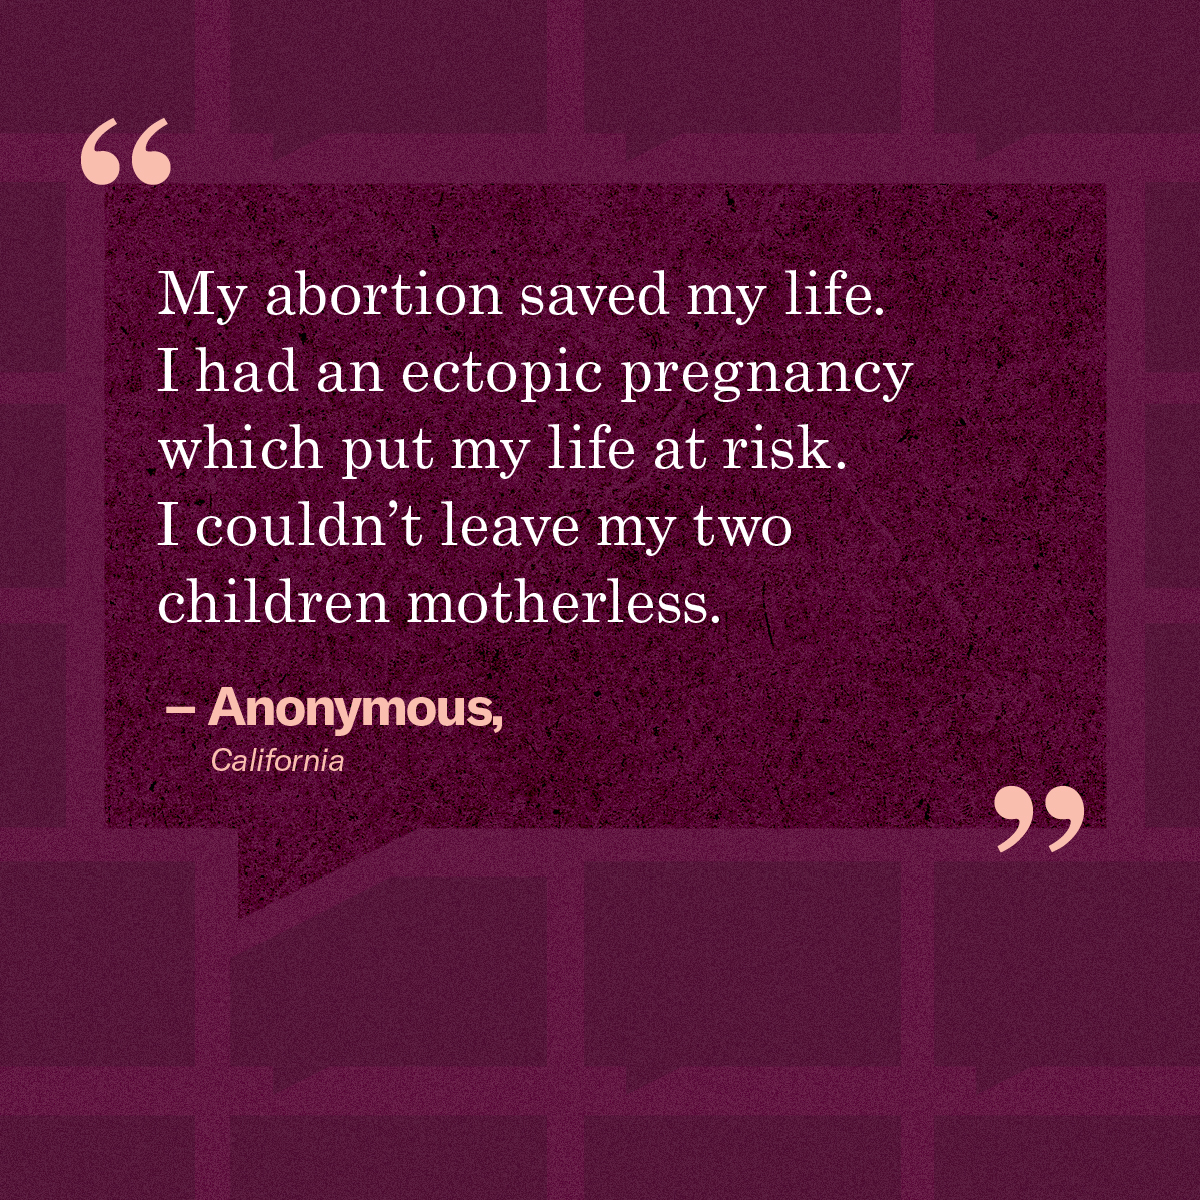 “My abortion saved my life. I had an ectopic pregnancy which put my life at risk. I couldn’t leave my two children motherless.” – Anonymous, California